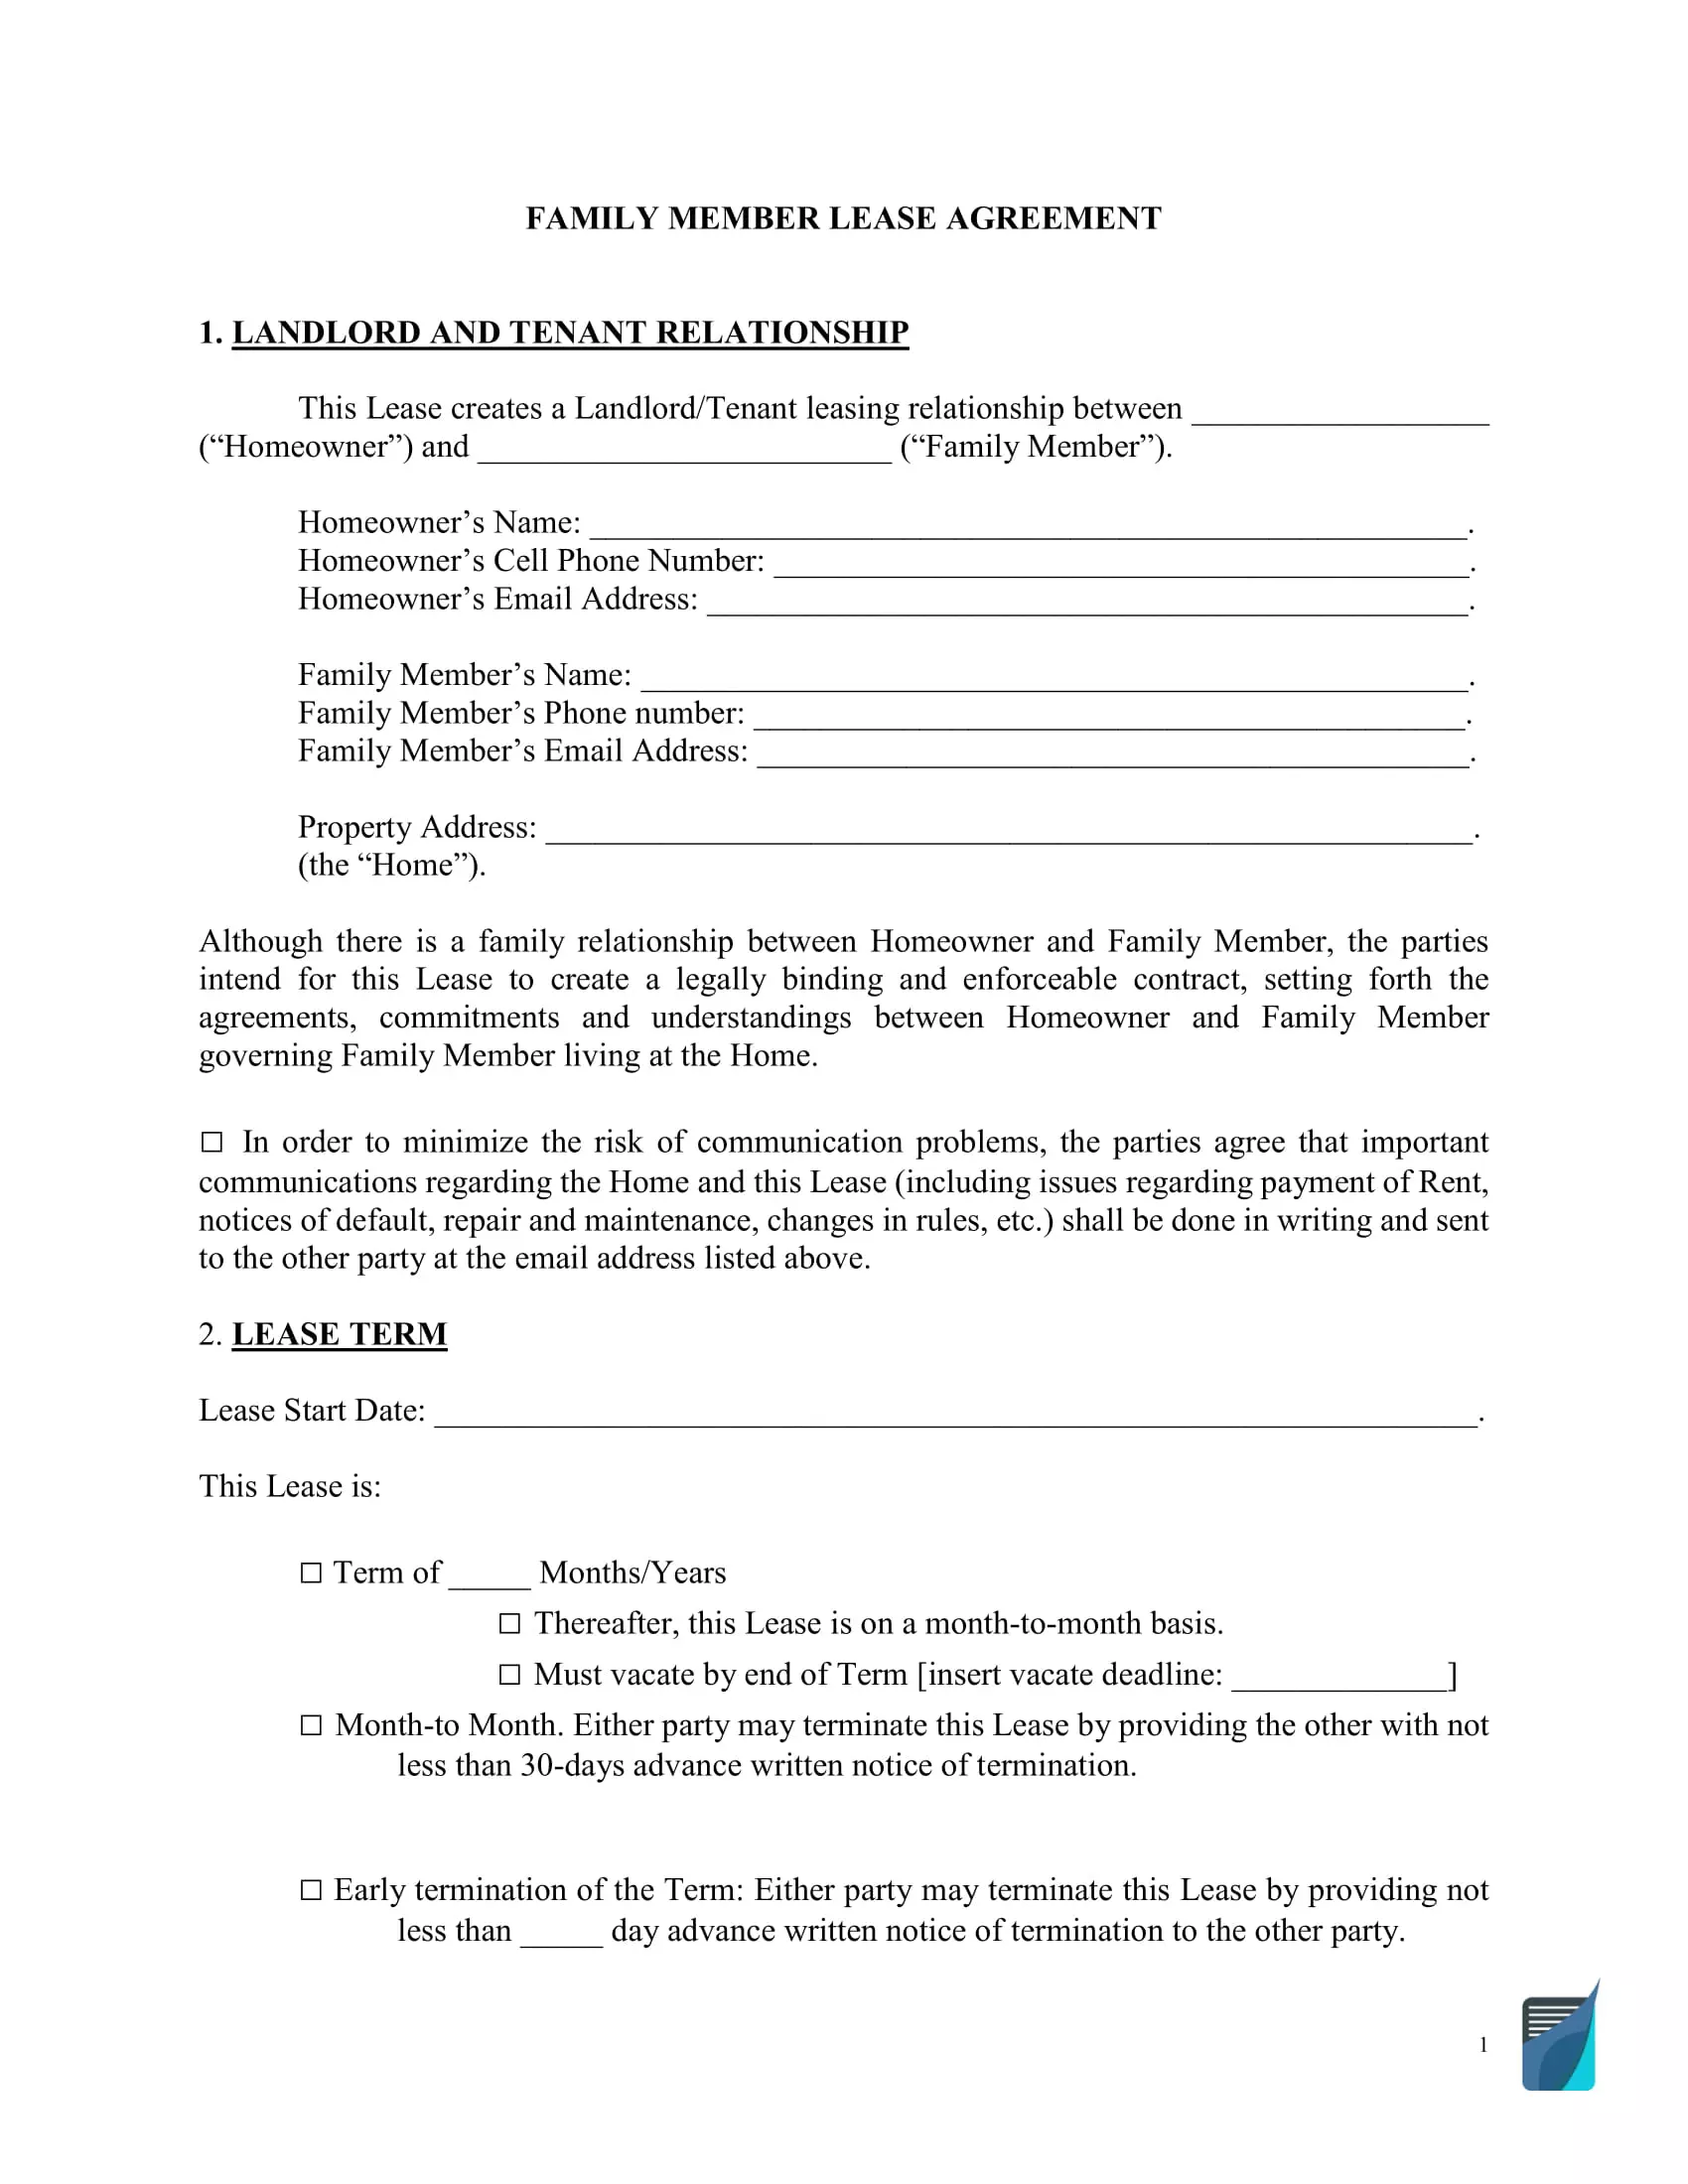 Family Rental Agreement Template ⇒ Parent-Child Lease Form With private rental agreement template